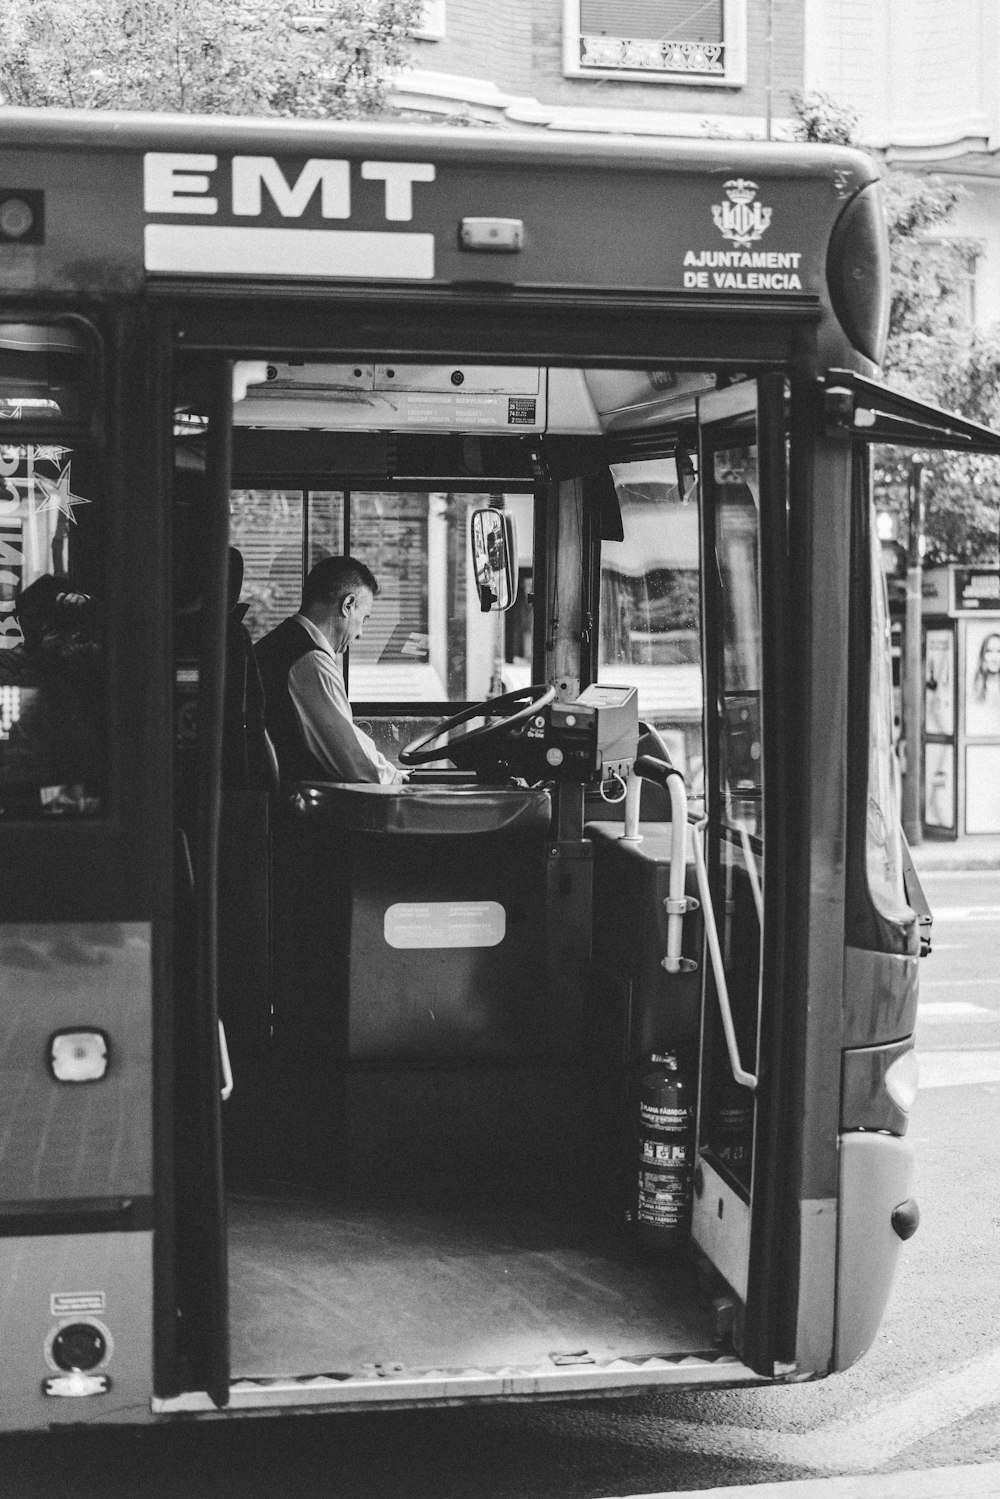 grayscale photo of EMT bus